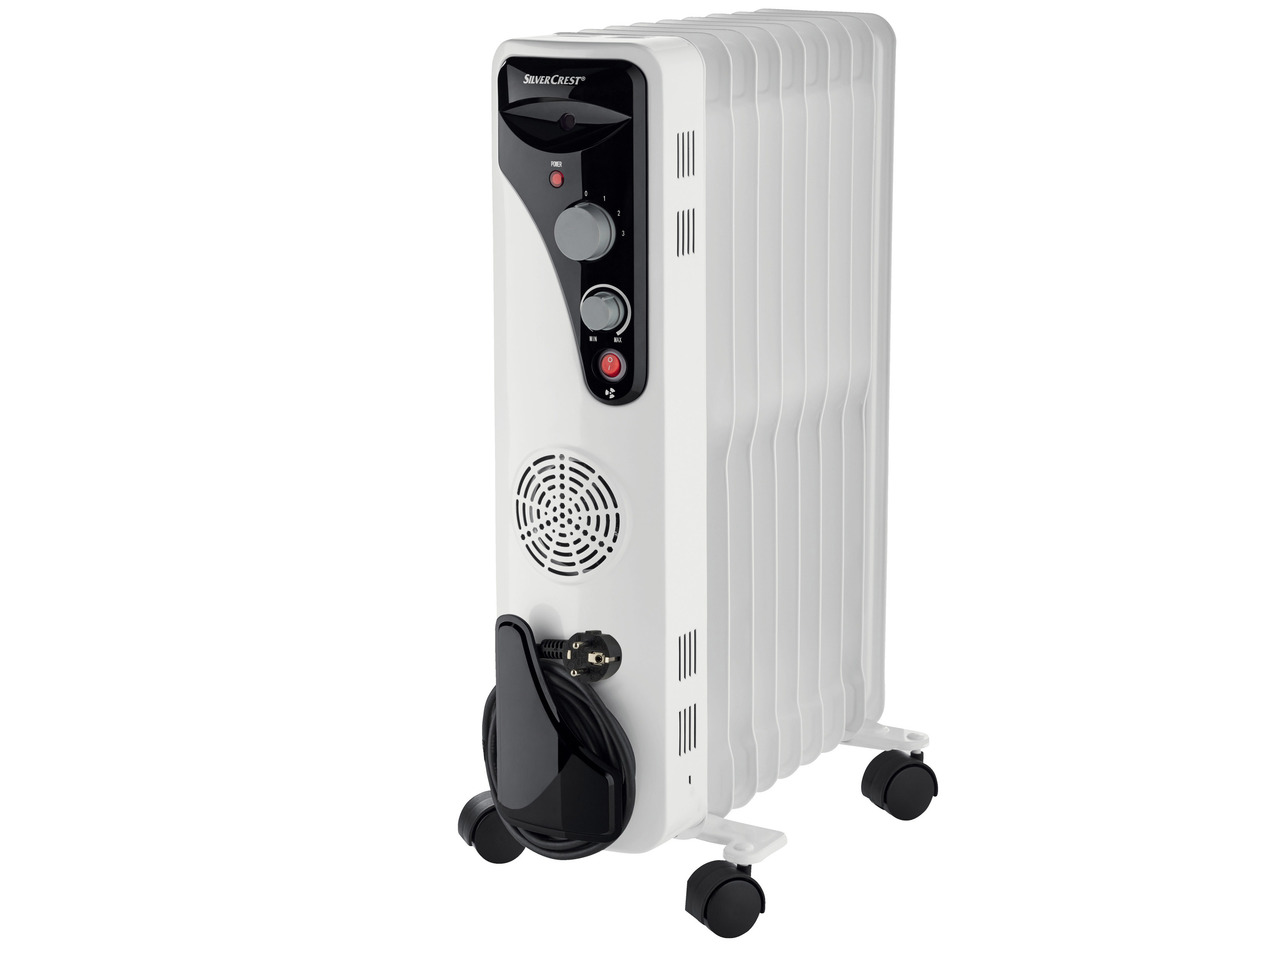 SILVERCREST 2300W Convection Heater with LCD Display